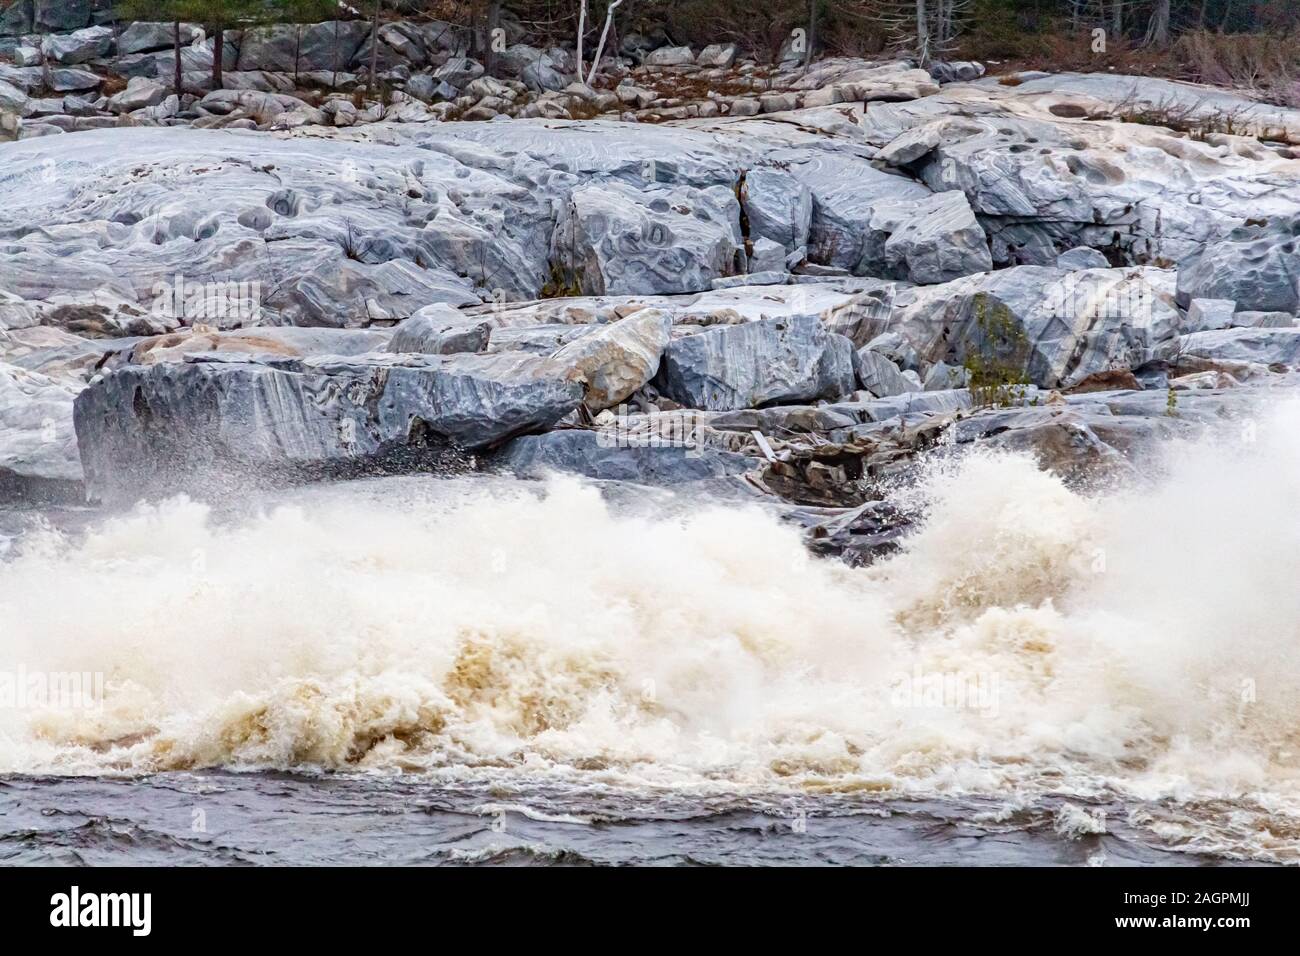 Water rushes into a river just below a hydroelectric dam. The whitewater crashes into the surface of the waterway creating mist and large white rapids Stock Photo